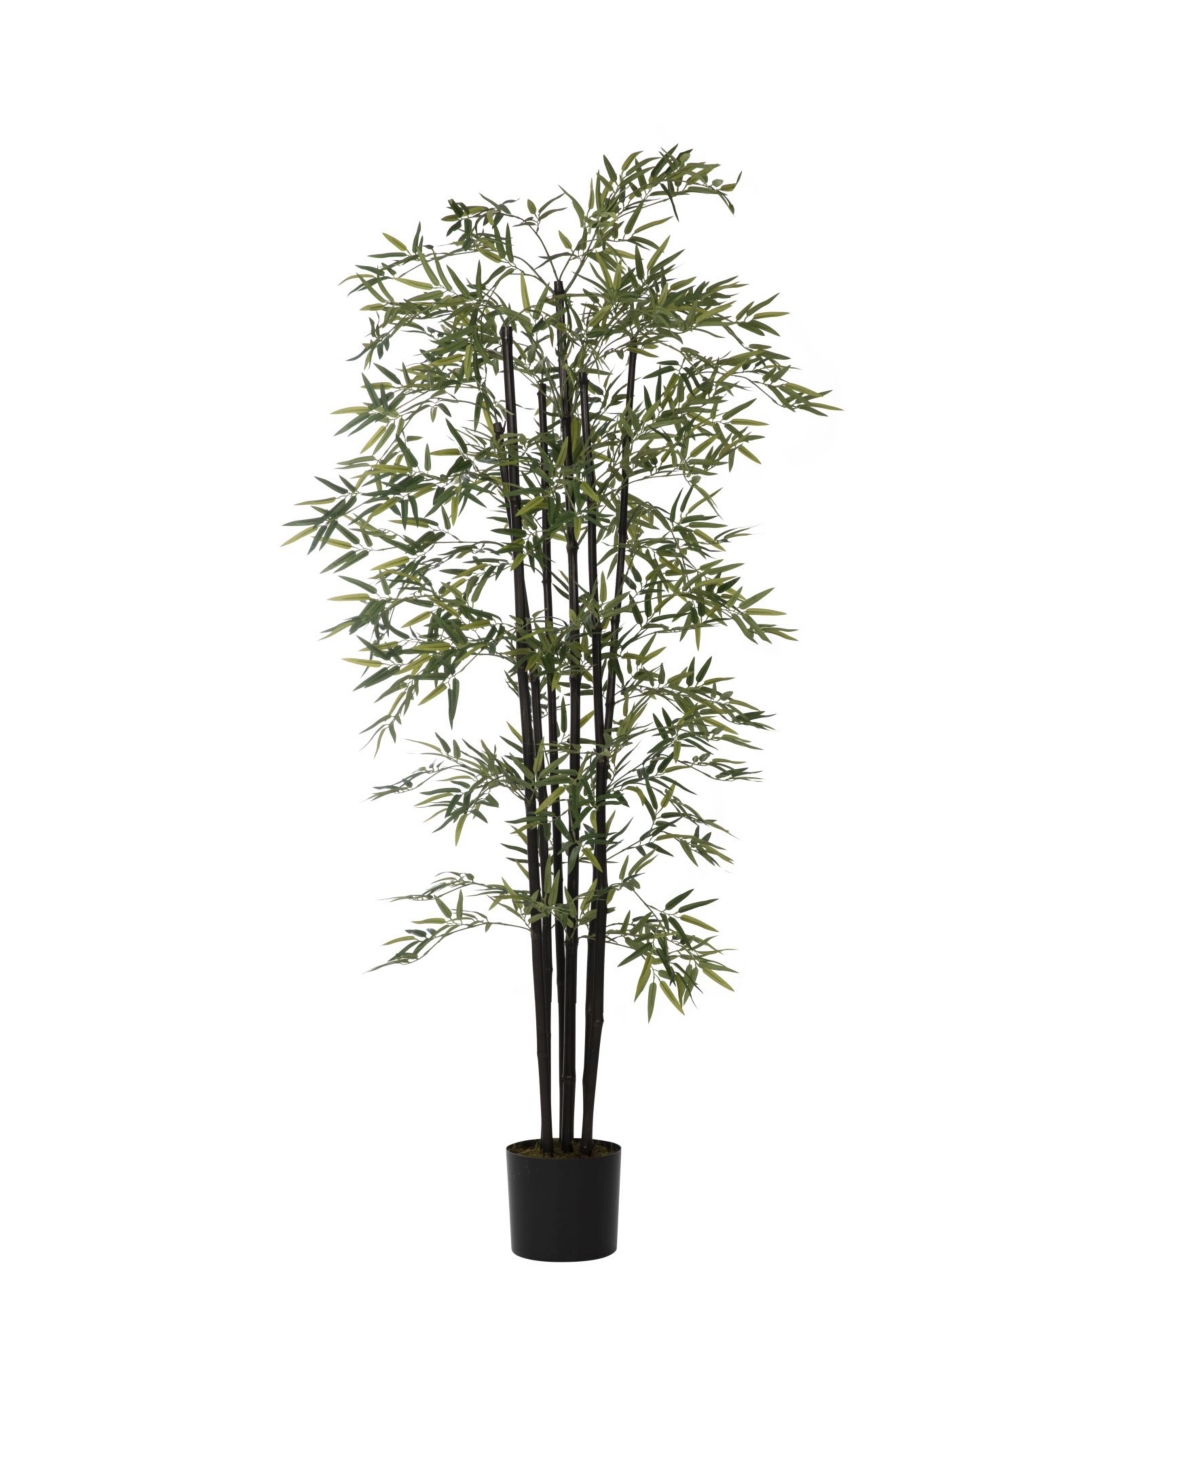 72" Tall Bamboo Tree Artificial Faux Decorative in Black Poles - Green